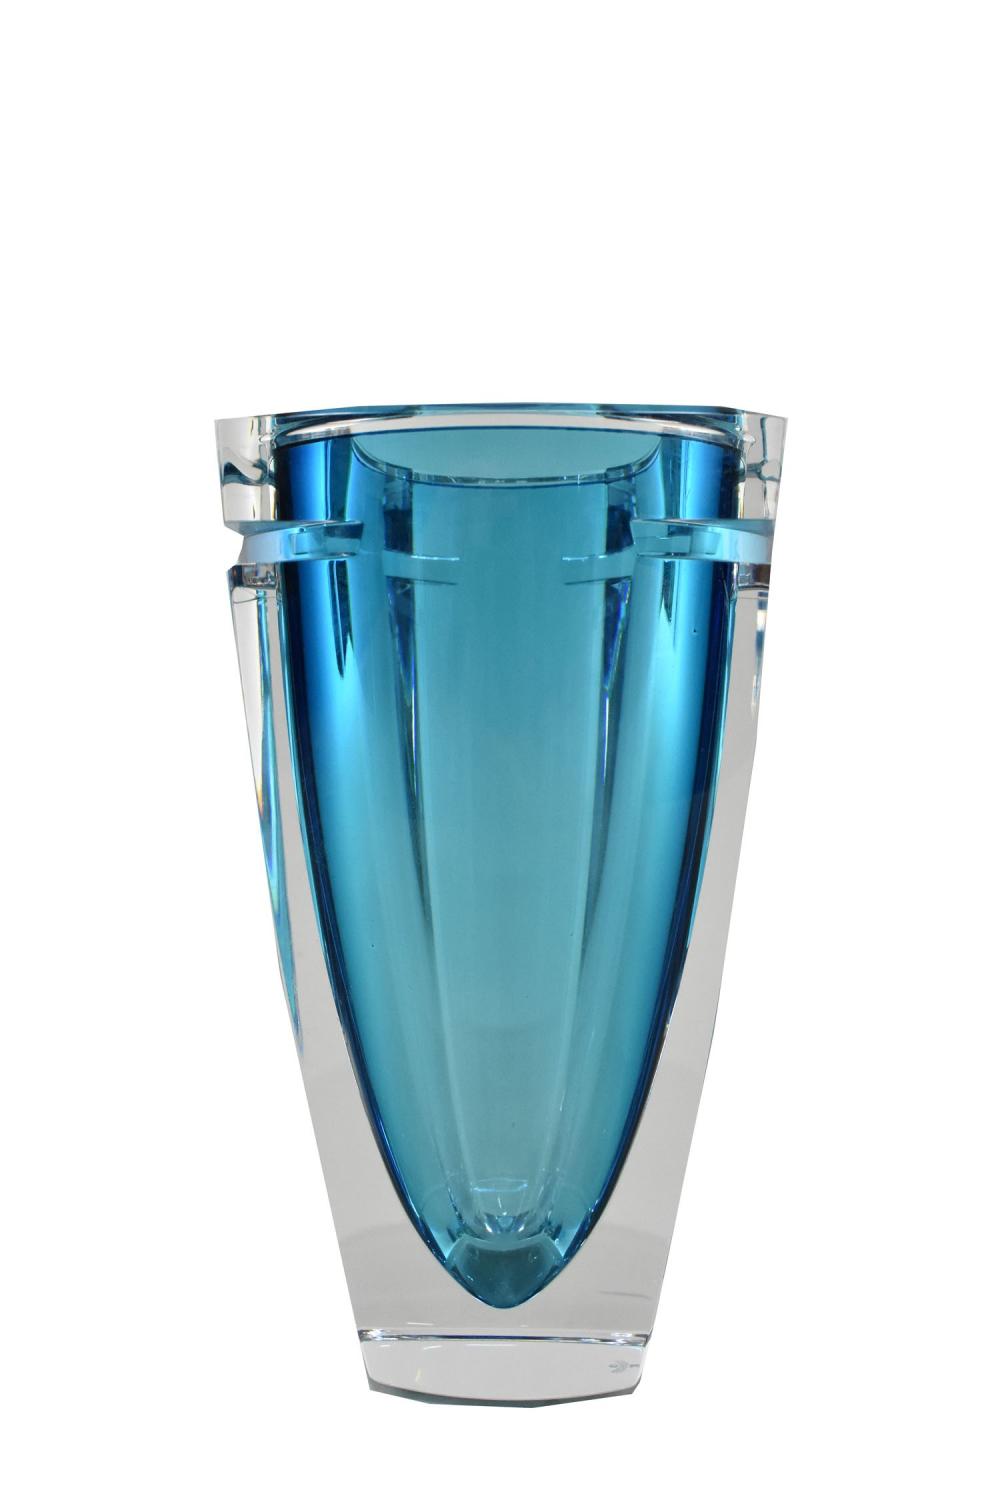 WATERFORD BLUE AND COLORLESS GLASS 353440